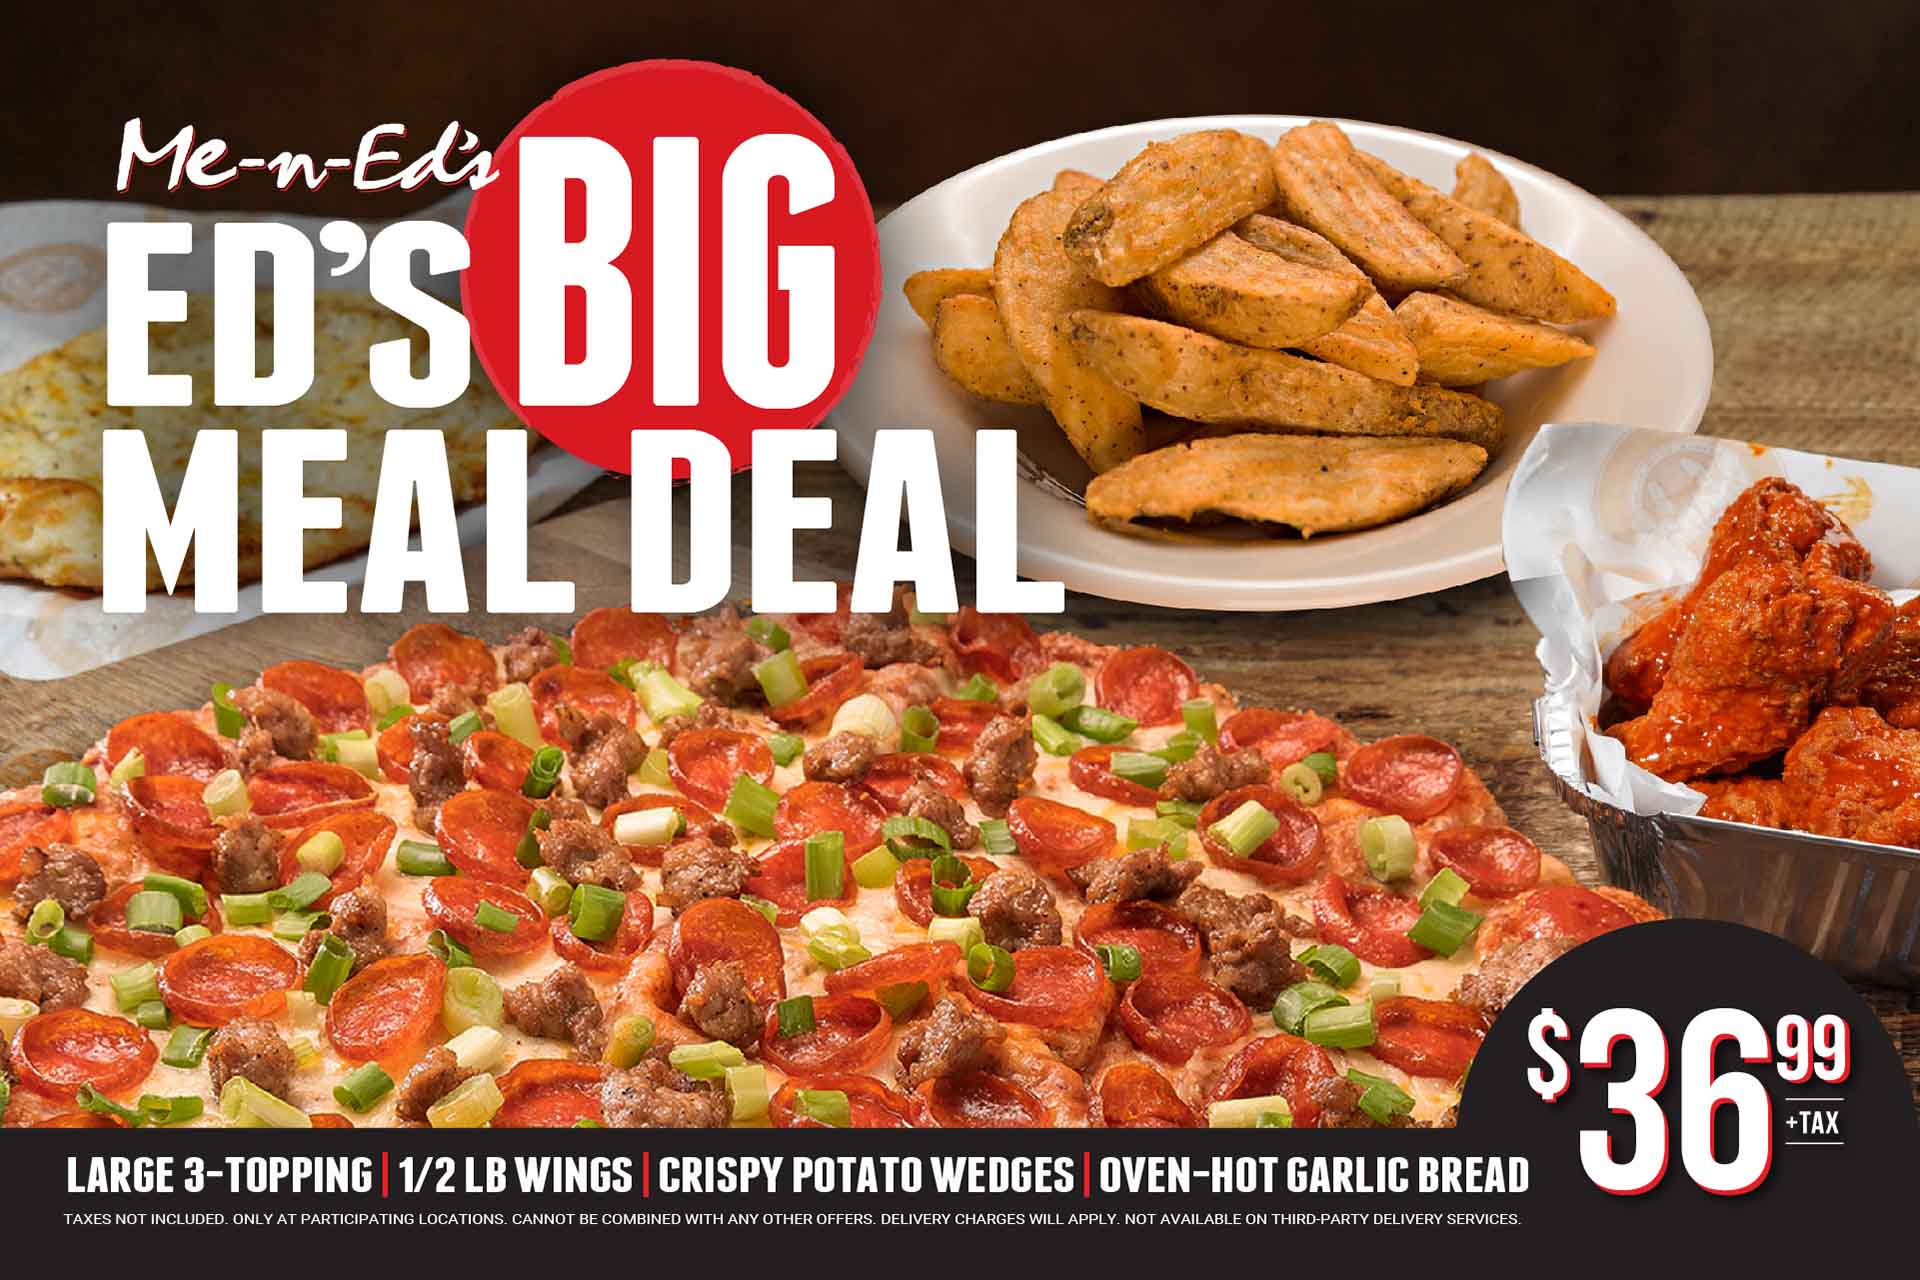 Me-N-Ed's Big Meal Deal - Large 3-Topping, 1/2 LB wings, crispy potato wedges, oven-hot garlic bread $36.99 + tax. Taxes not included. Only at participating locations. Cannot be combined with any other offers. Delivery charges will apply. Not available on third party delivery services.